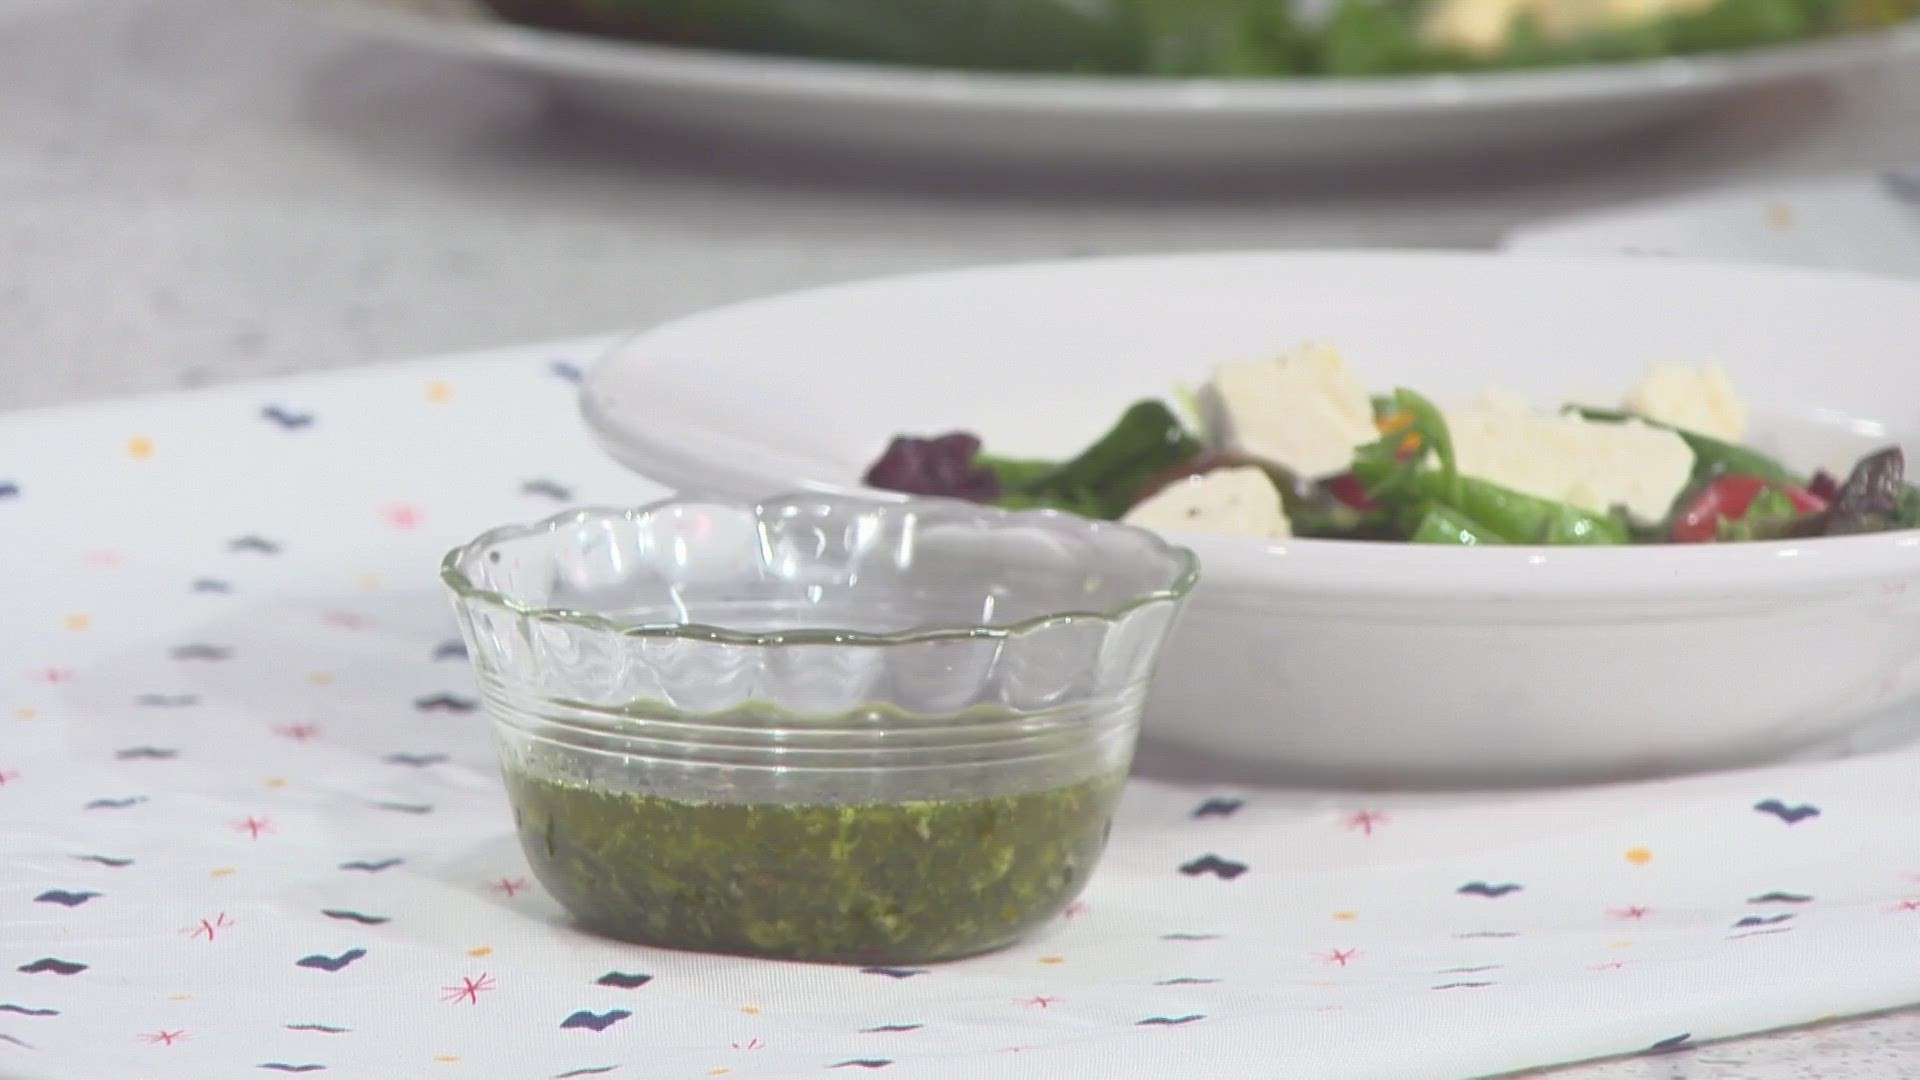 Chef Kevin Belton whips up some delicious sauces for National Sauce month.